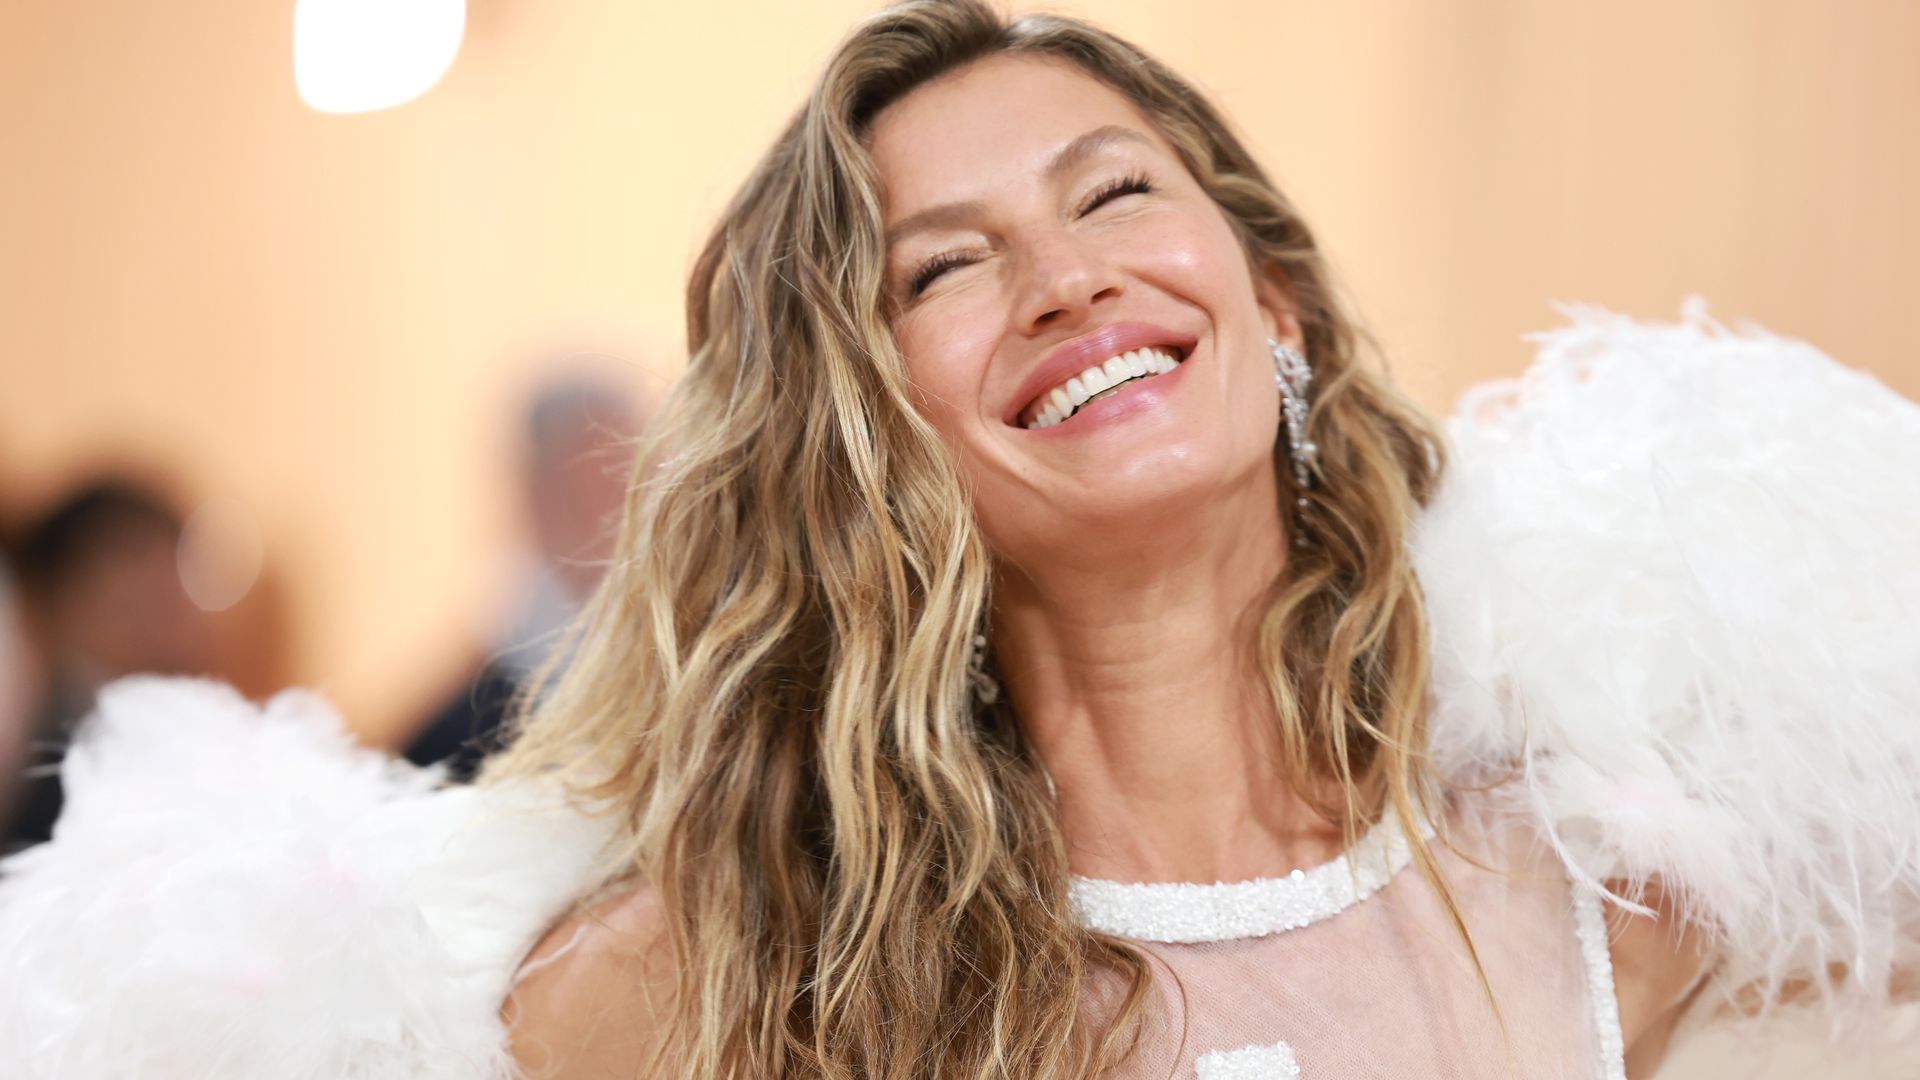 Gisele Bündchen's glowy no-makeup makeup at the Met Gala - a complete product breakdown